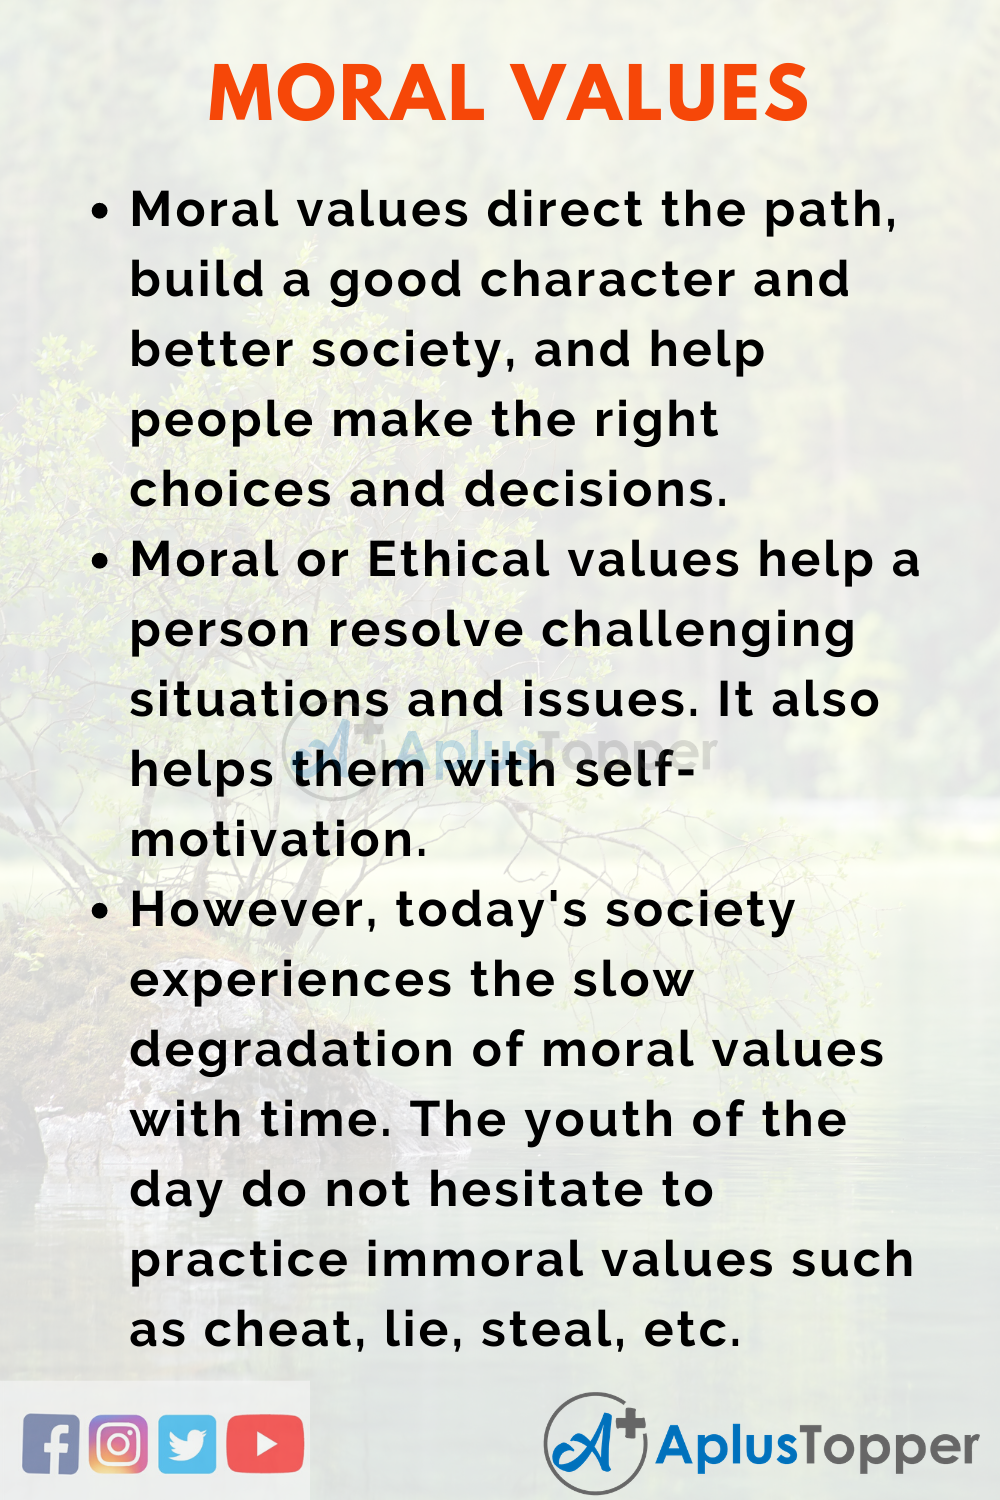 importance of moral values in life essay